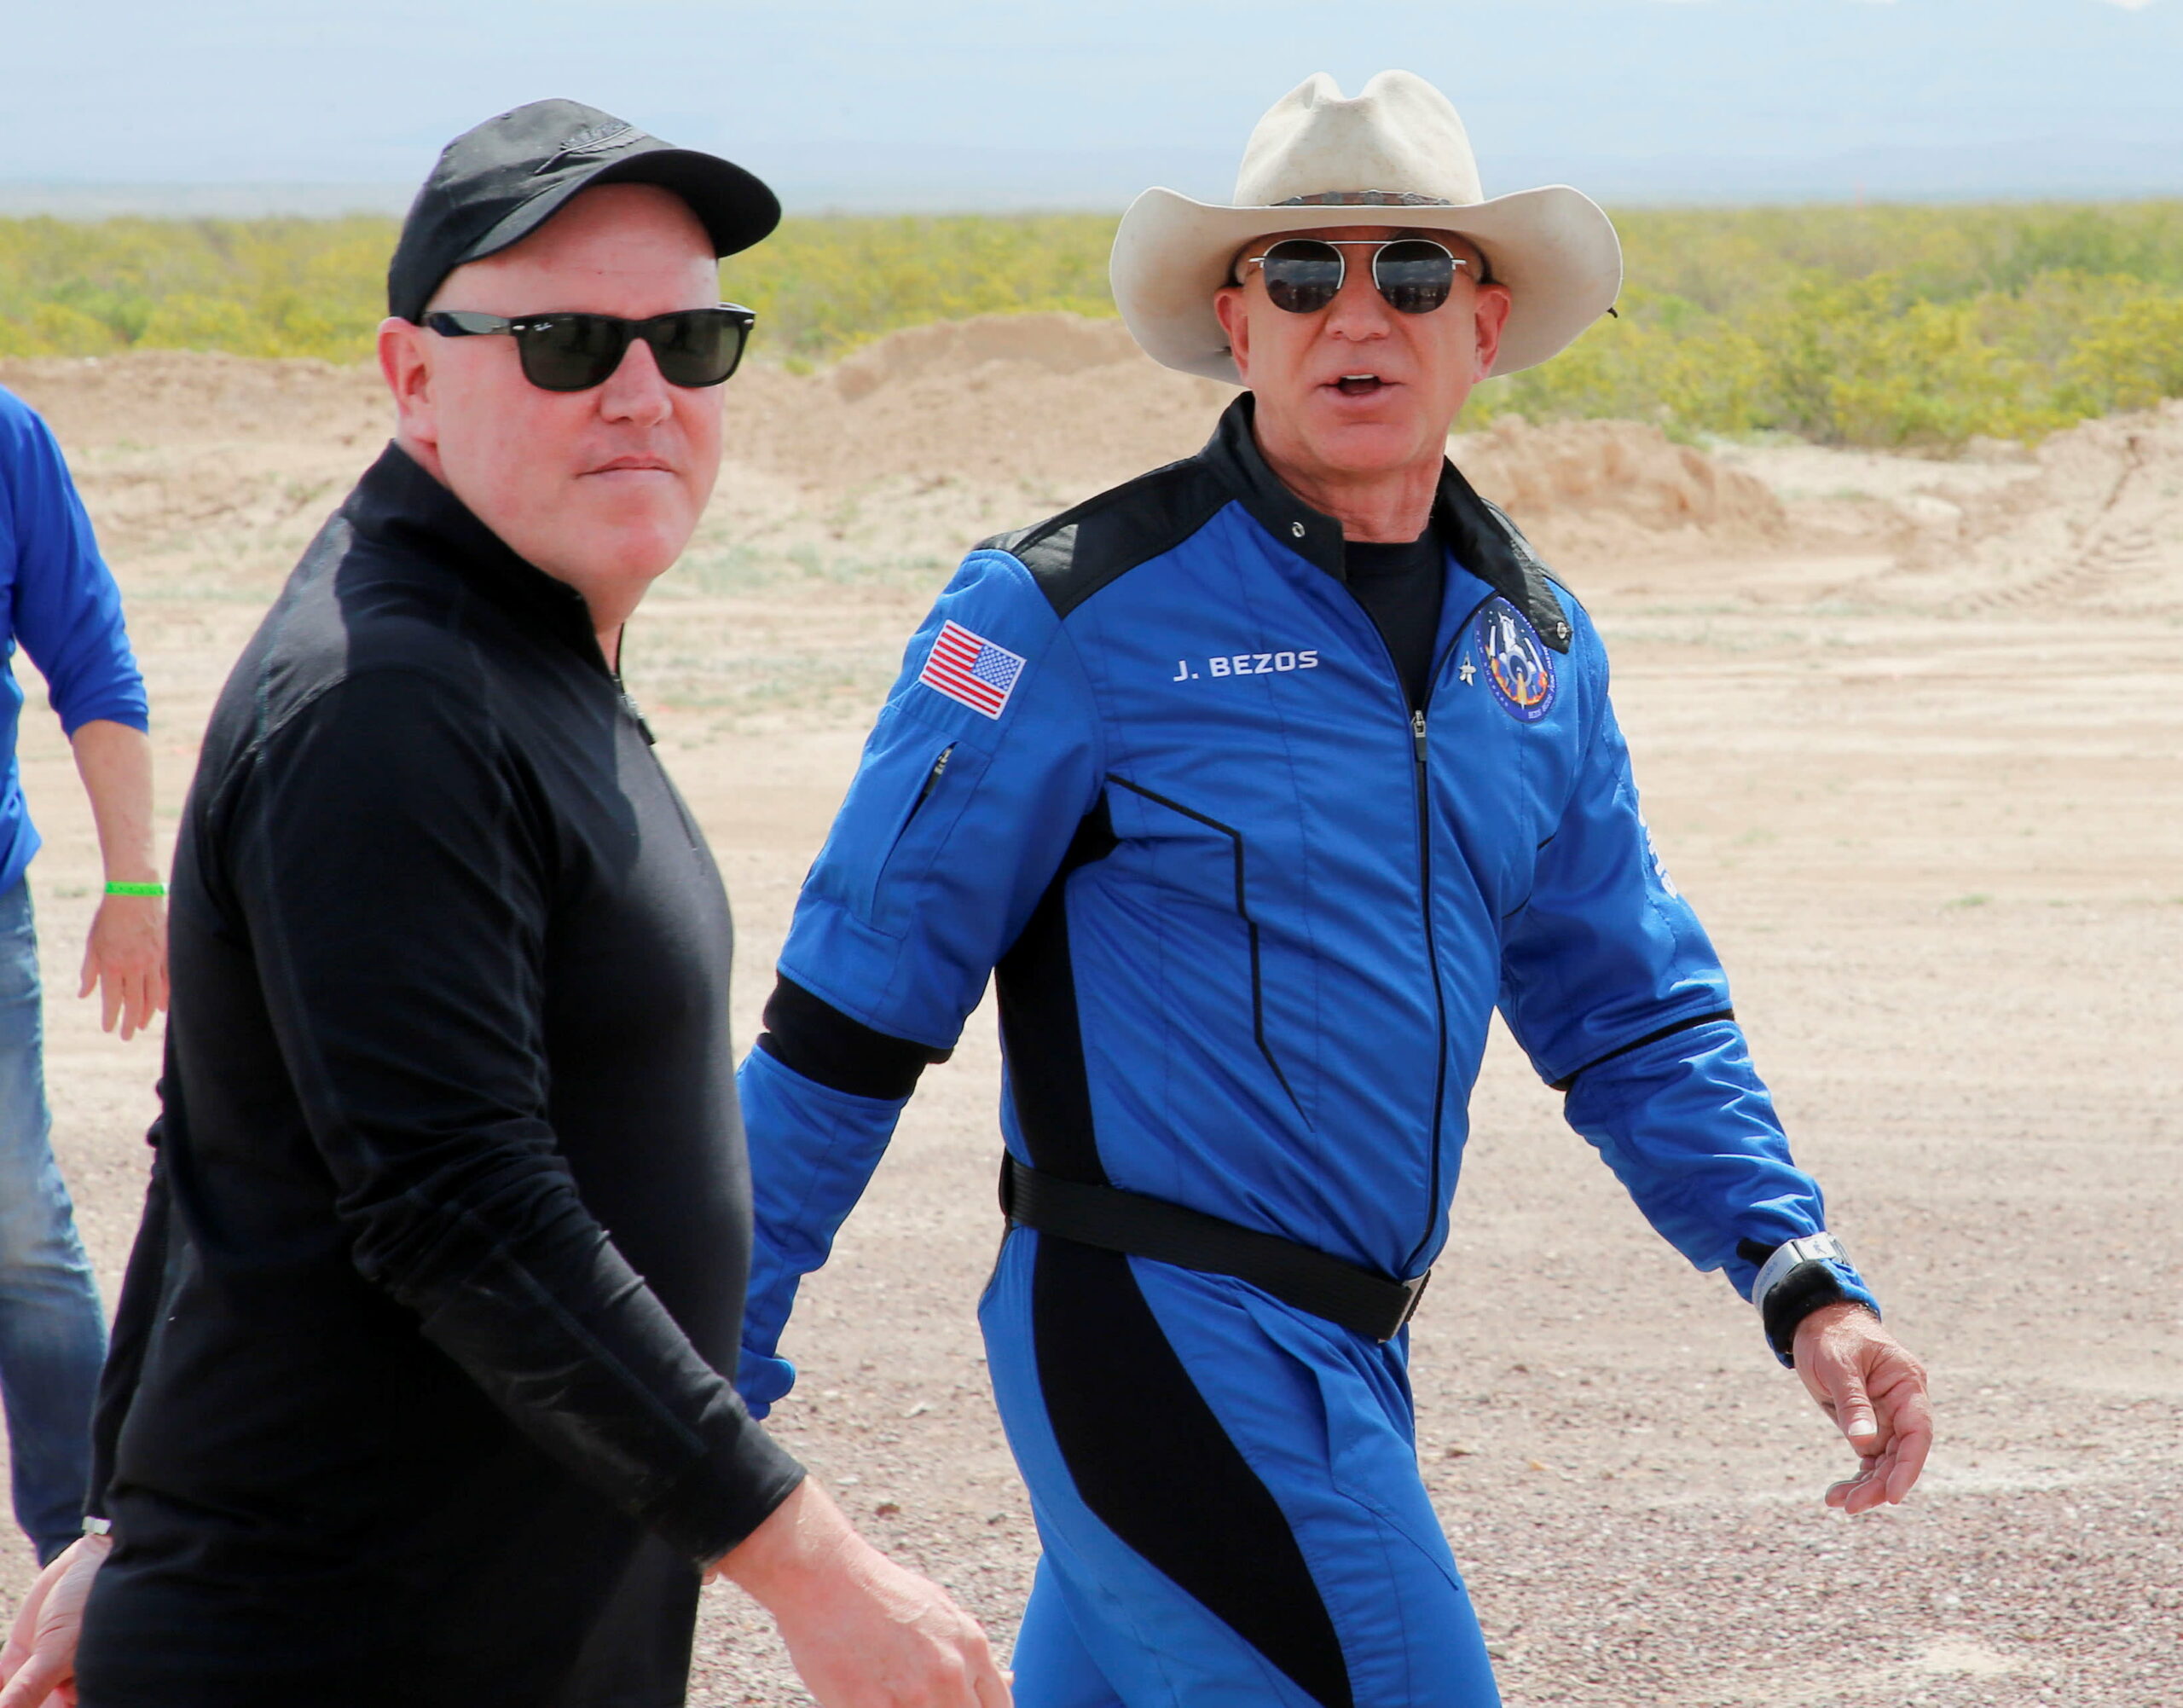 Jeff Bezos’ Blue Origin takes NASA to federal courtroom over HLS contract